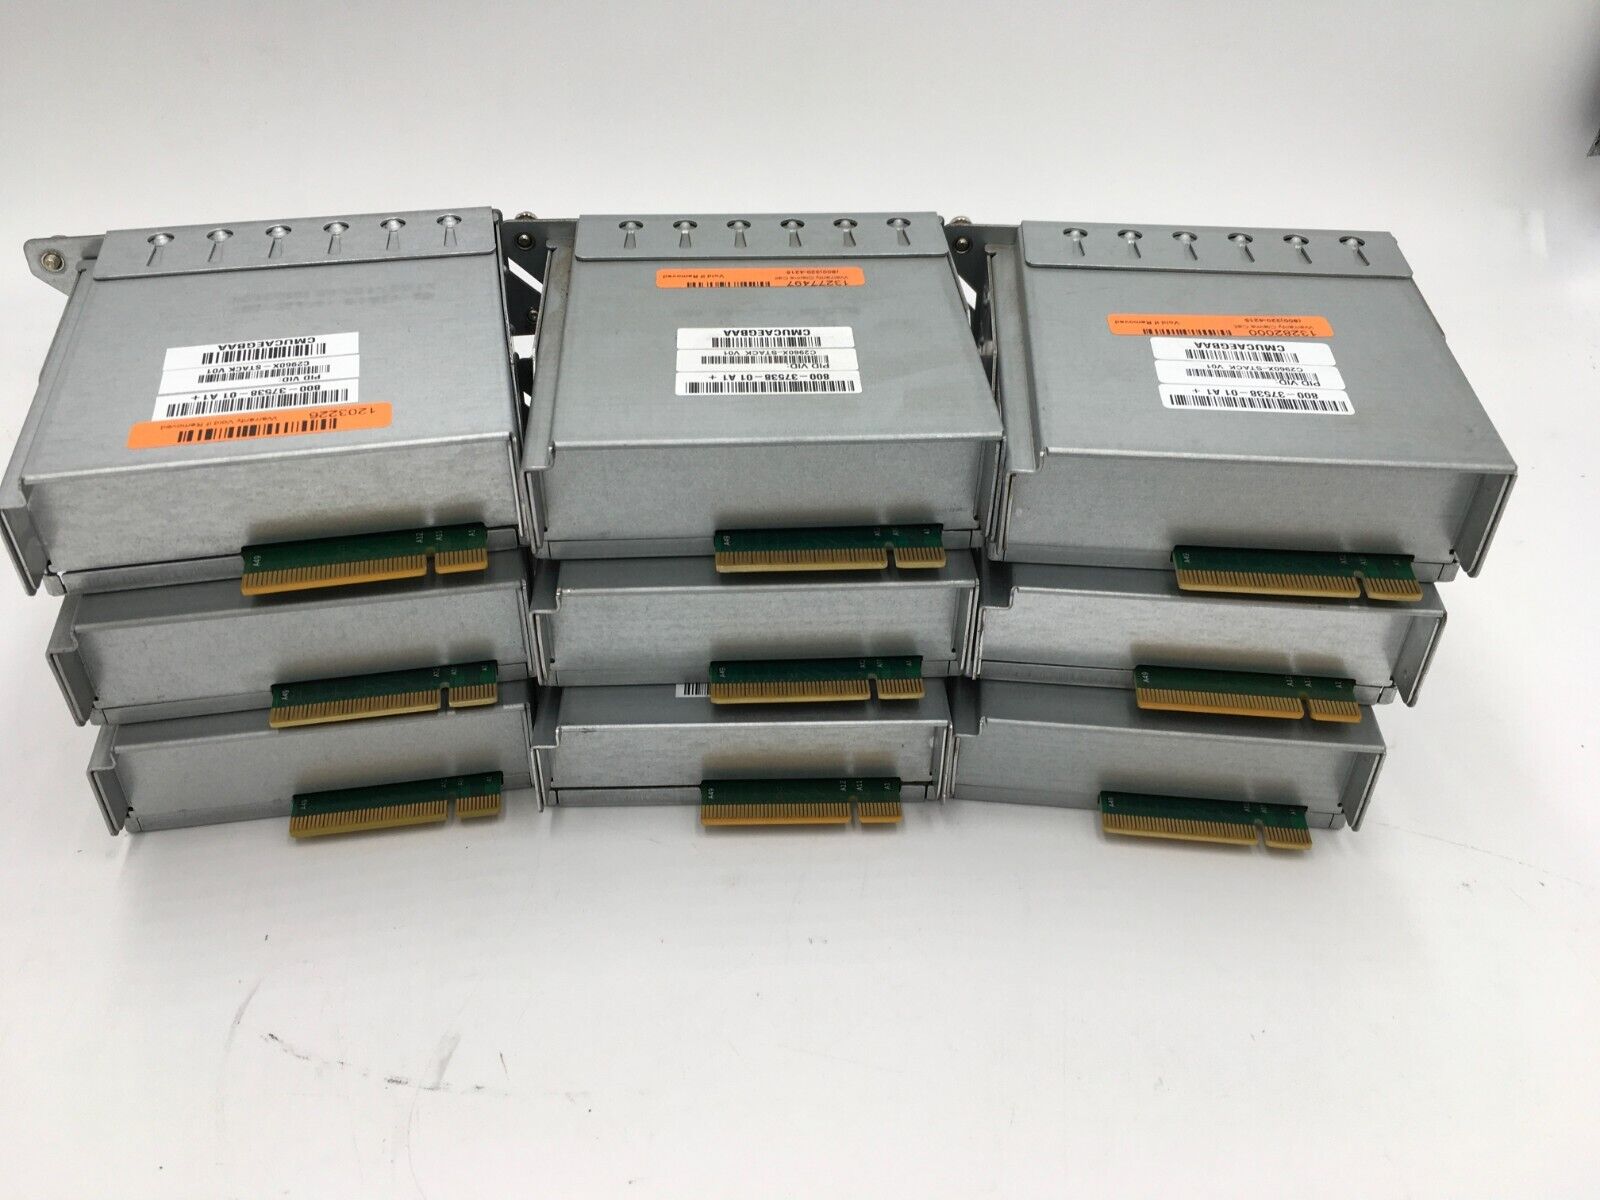 Lot of 9   Cisco C2960X-STACK FlexStack Plus Stacking Module 2960-X TESTED UNITS